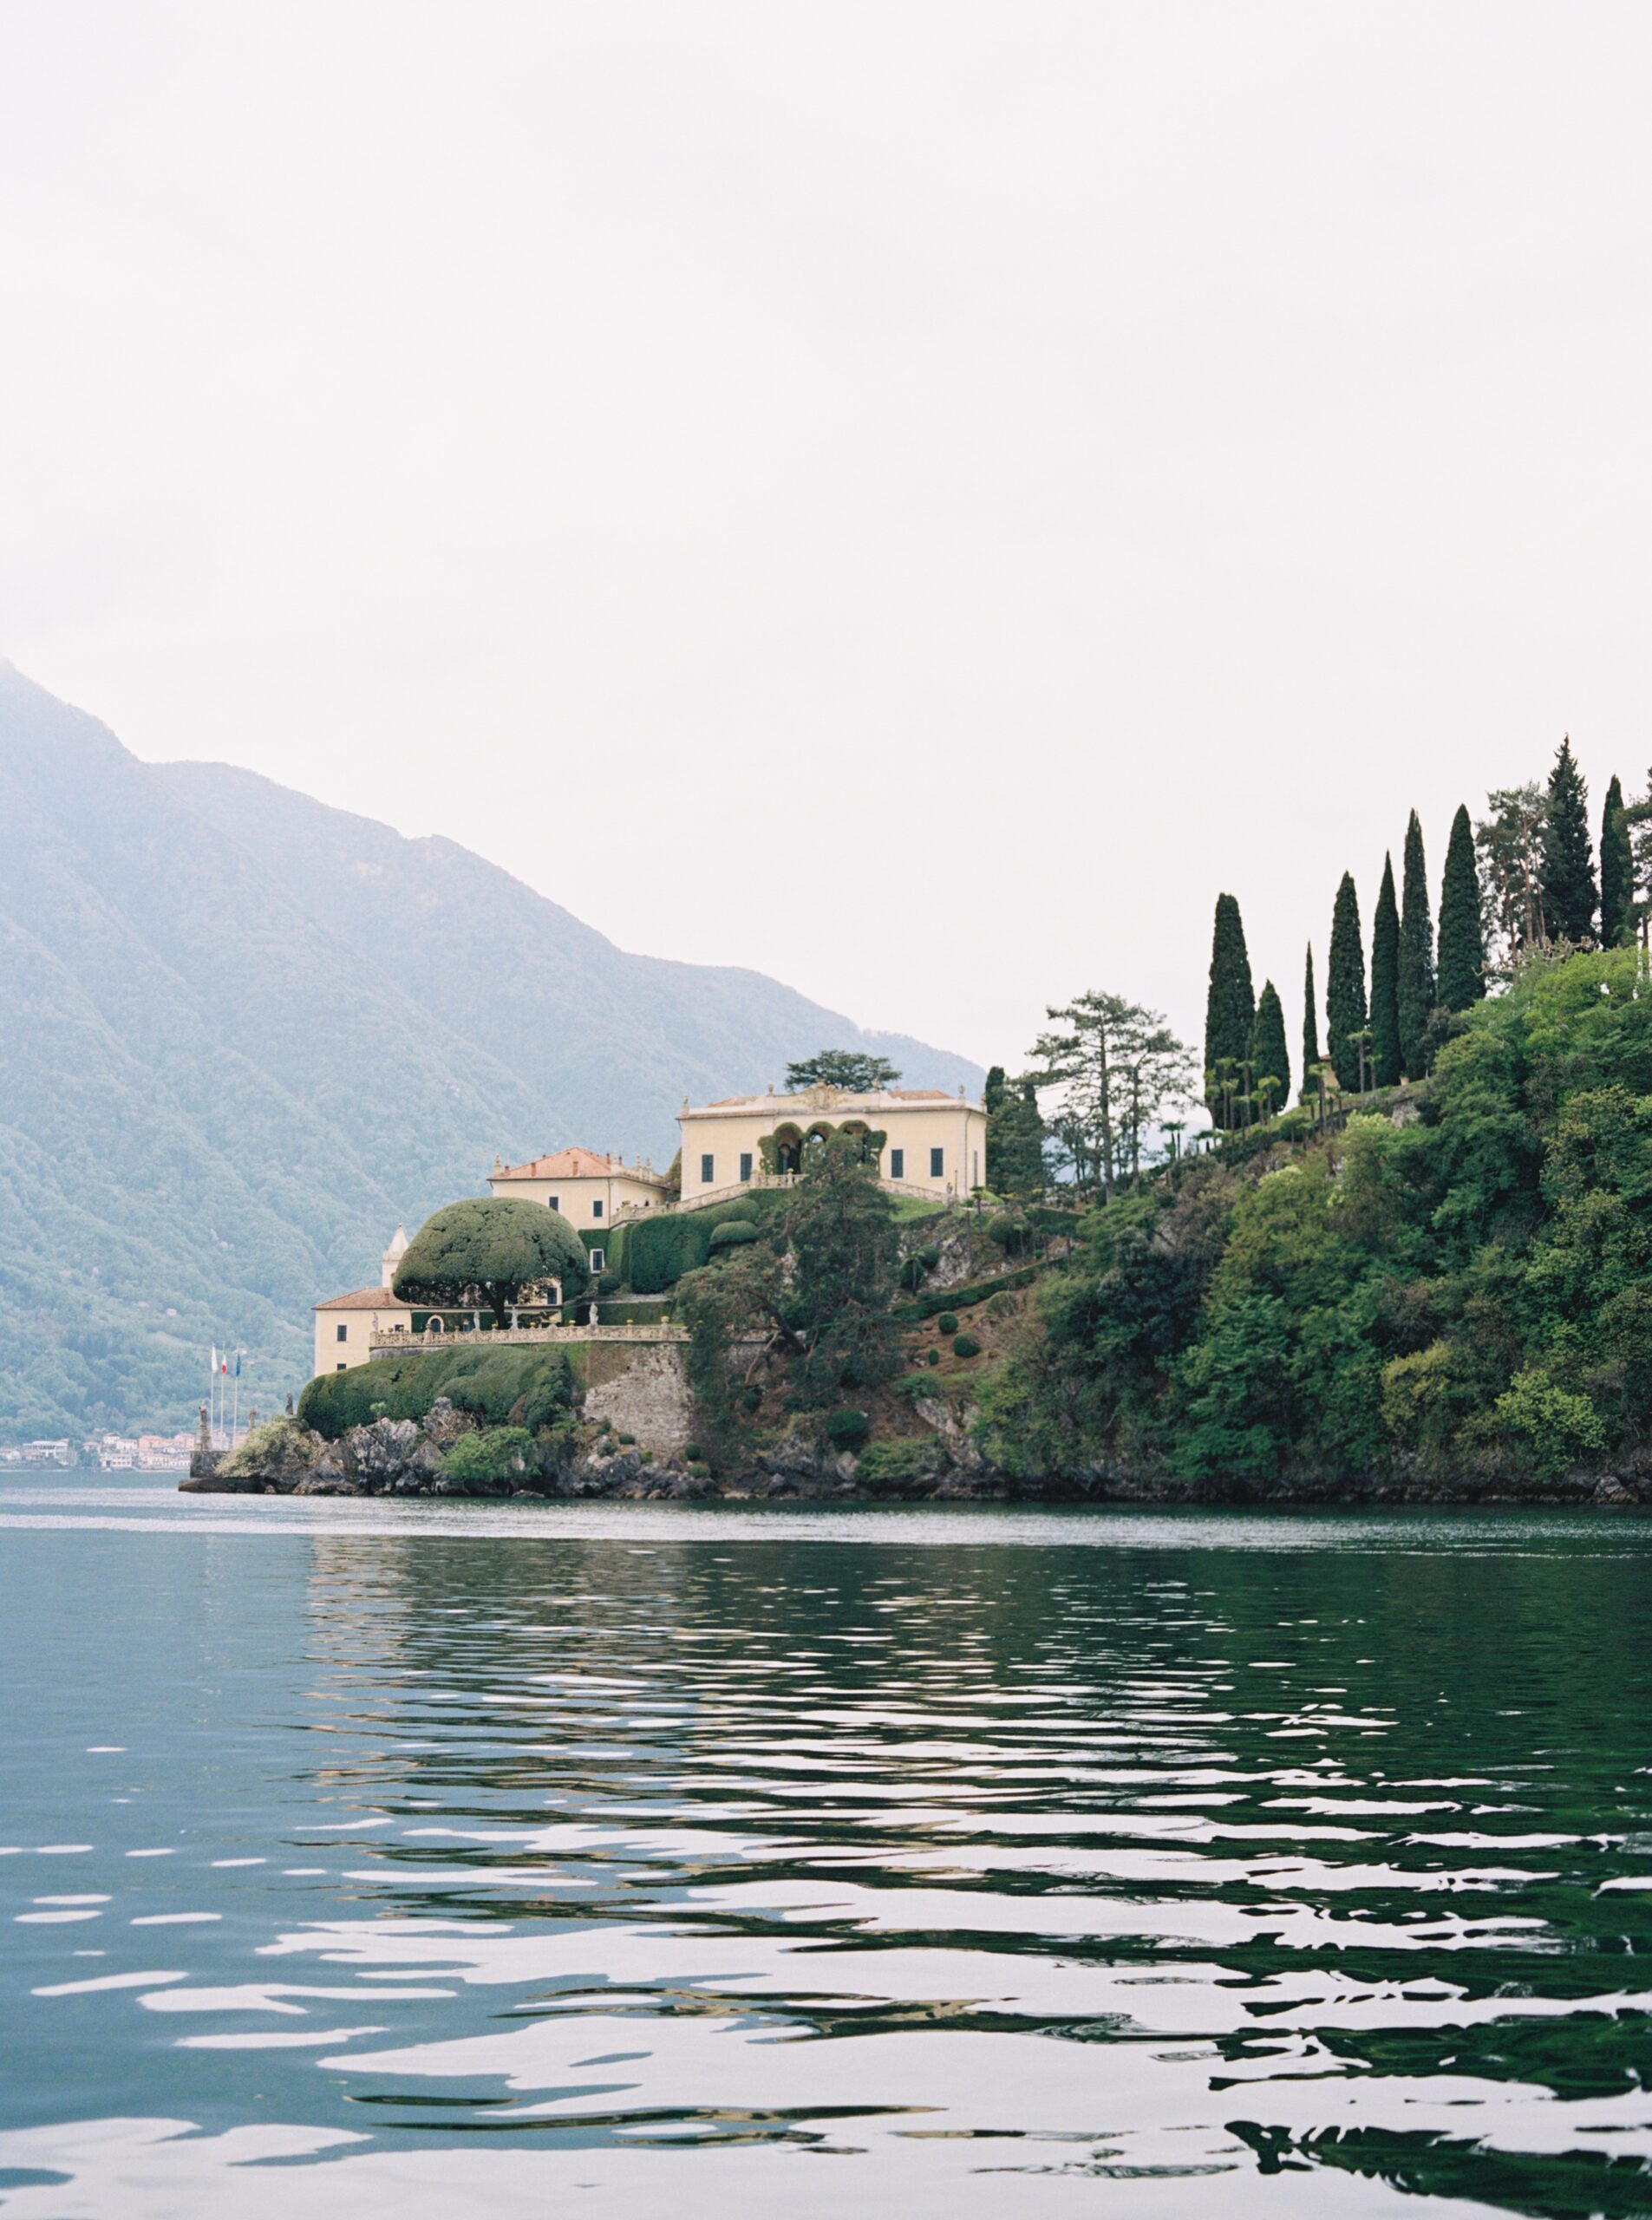 view of Villa Balbiano from the boat